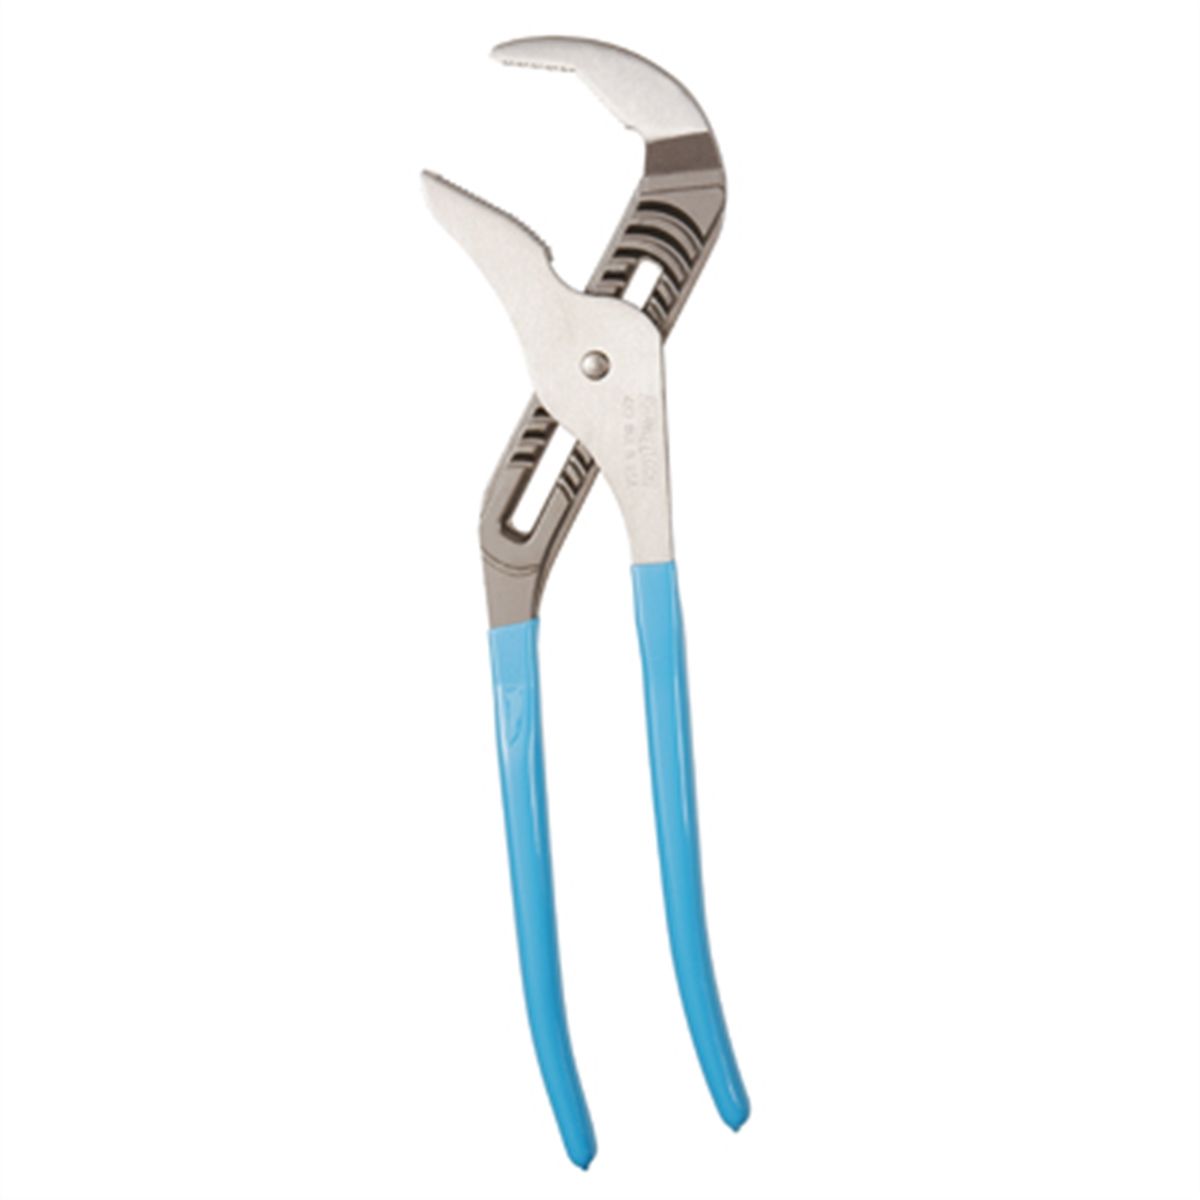 Channellock GripLock Tongue & Groove Pliers GLS3 - The Home Depot